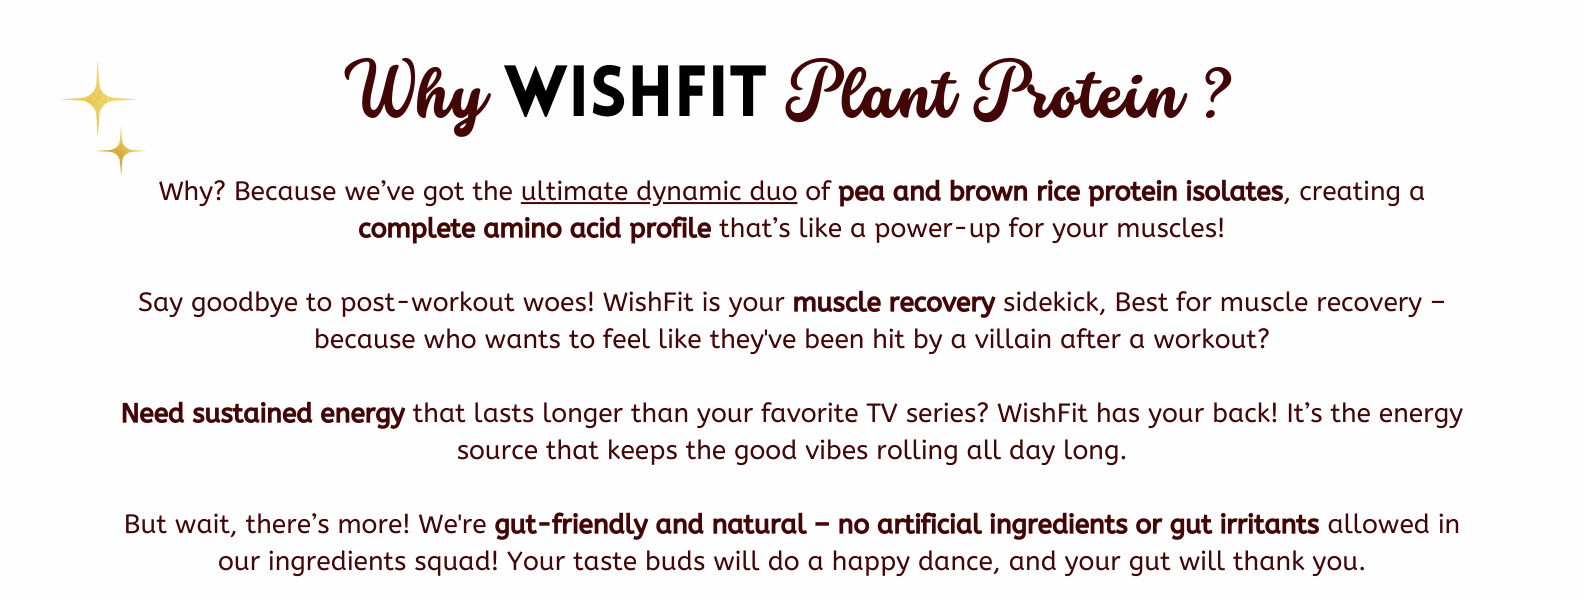 WishFit Vegan Plant-Based Protein Powder Organic Vegan Protein for Fitness Enthusiasts Clean and Sustainable Plant-Based Protein - WishFit Best Dairy-Free Protein Powder by WishFit Nutrient-Dense Vegan Protein for Wellness WishFit Non-GMO Vegan Protein Supplement Premium Vegan Protein Shake - WishFit WishFit: Gluten-Free Plant-Powered Protein Vegan Muscle-Building Protein Powder - WishFit WishFit Vegan Protein Blend with Pea and Rice Proteins